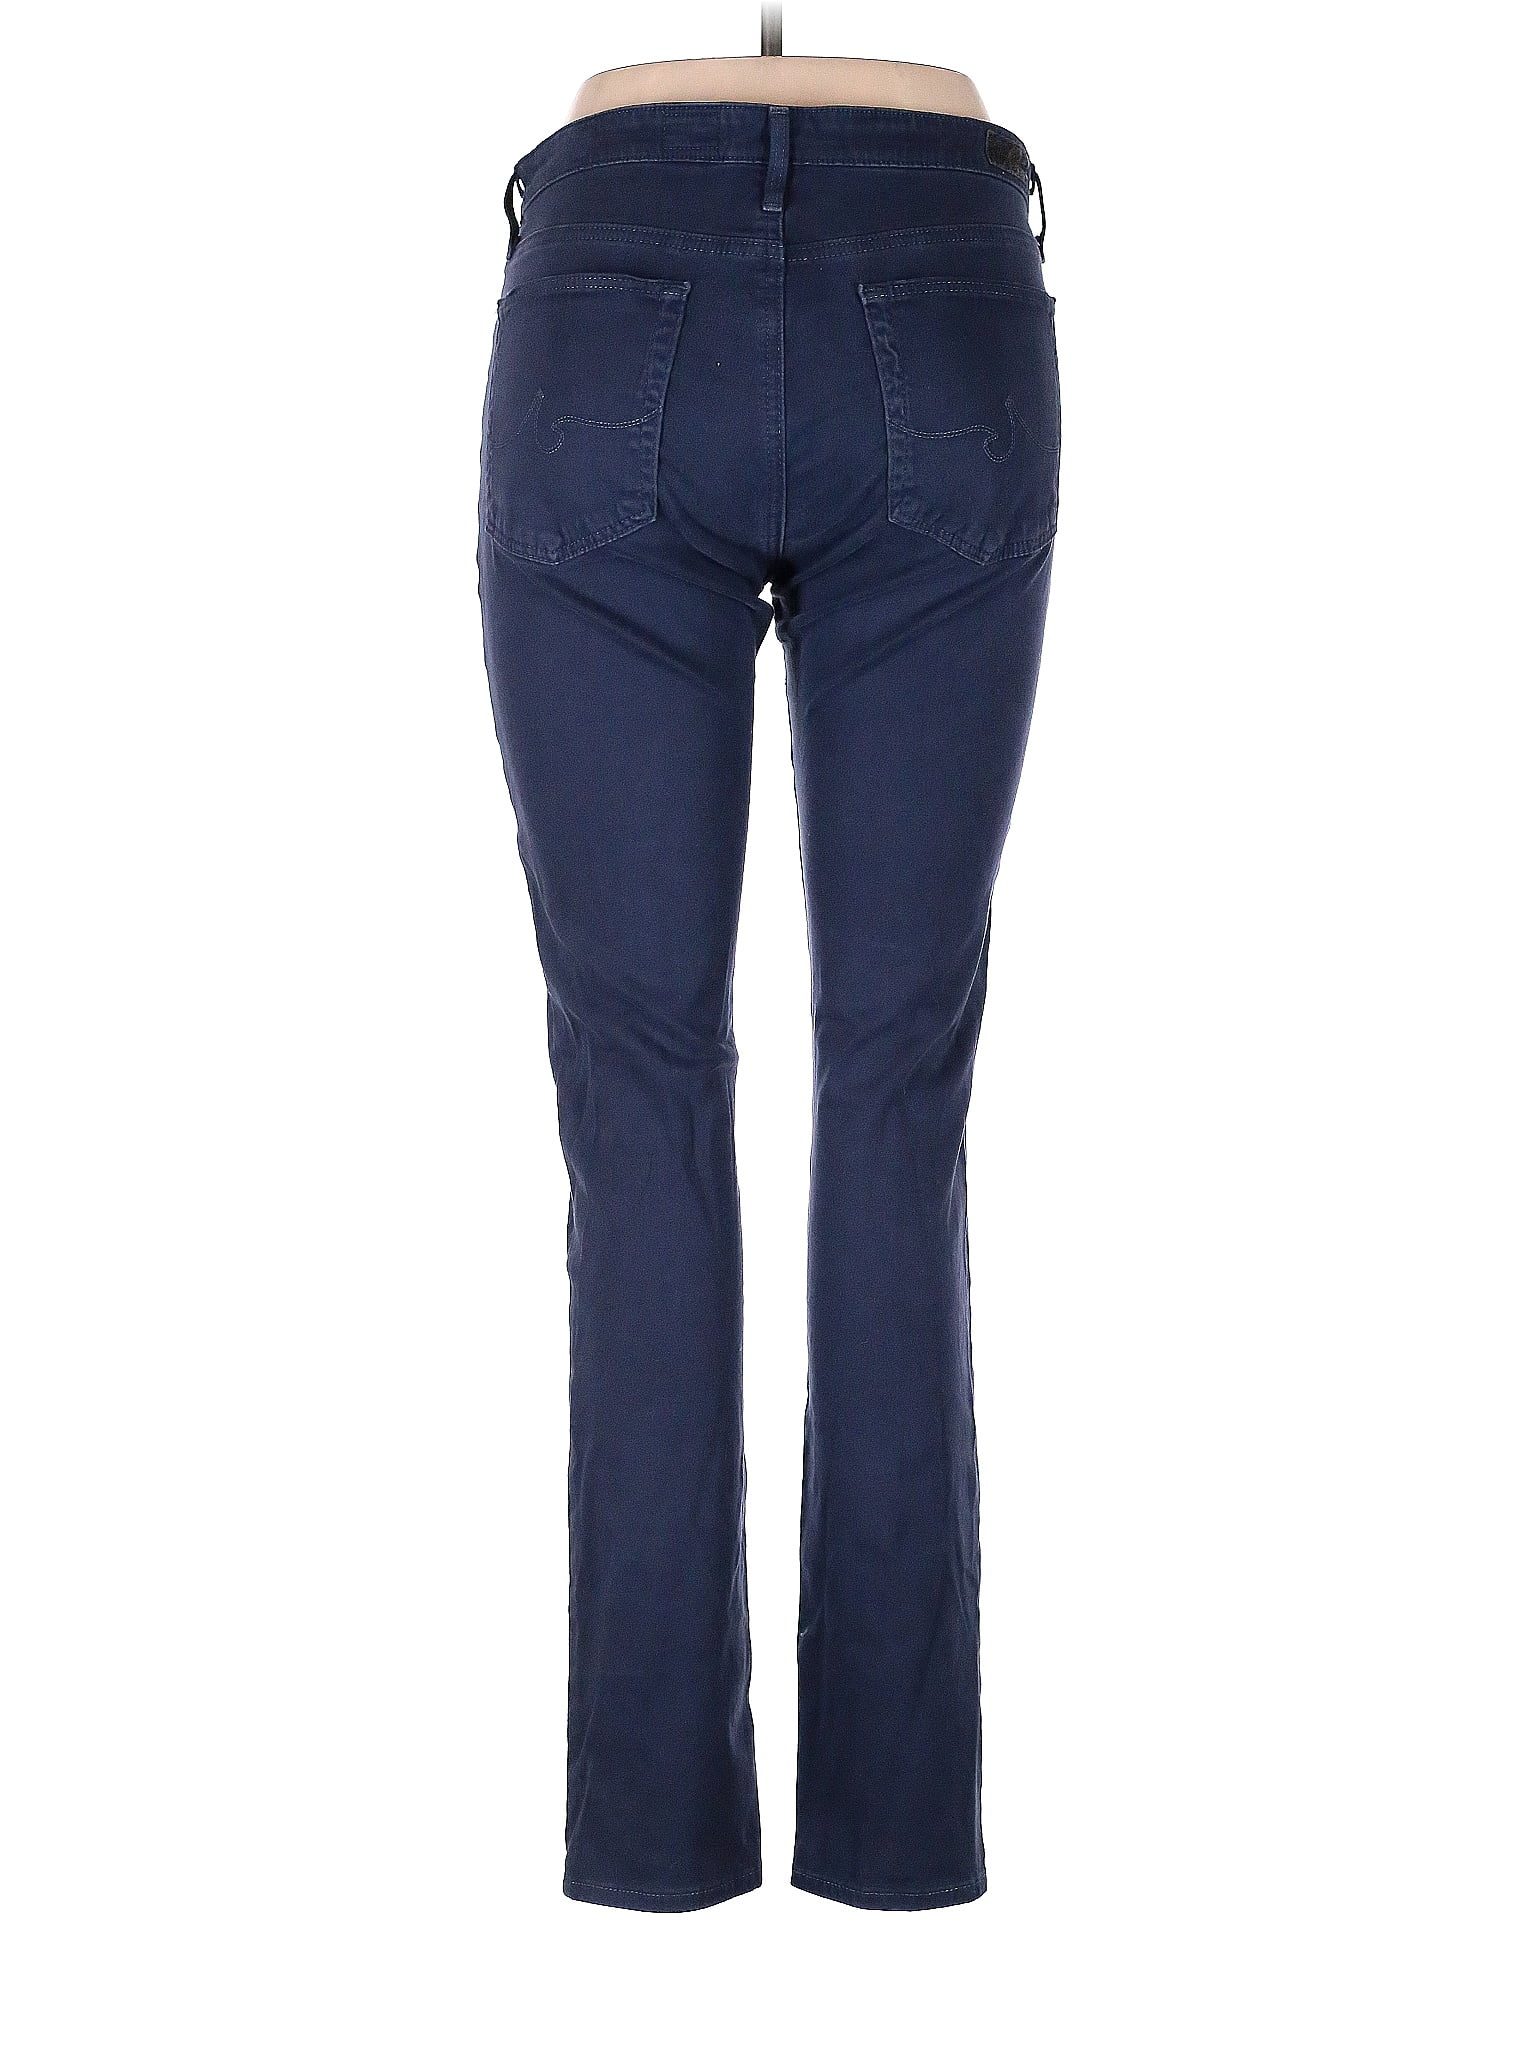 Adriano Goldschmied Solid Blue Casual Pants 30 Waist - 80% off